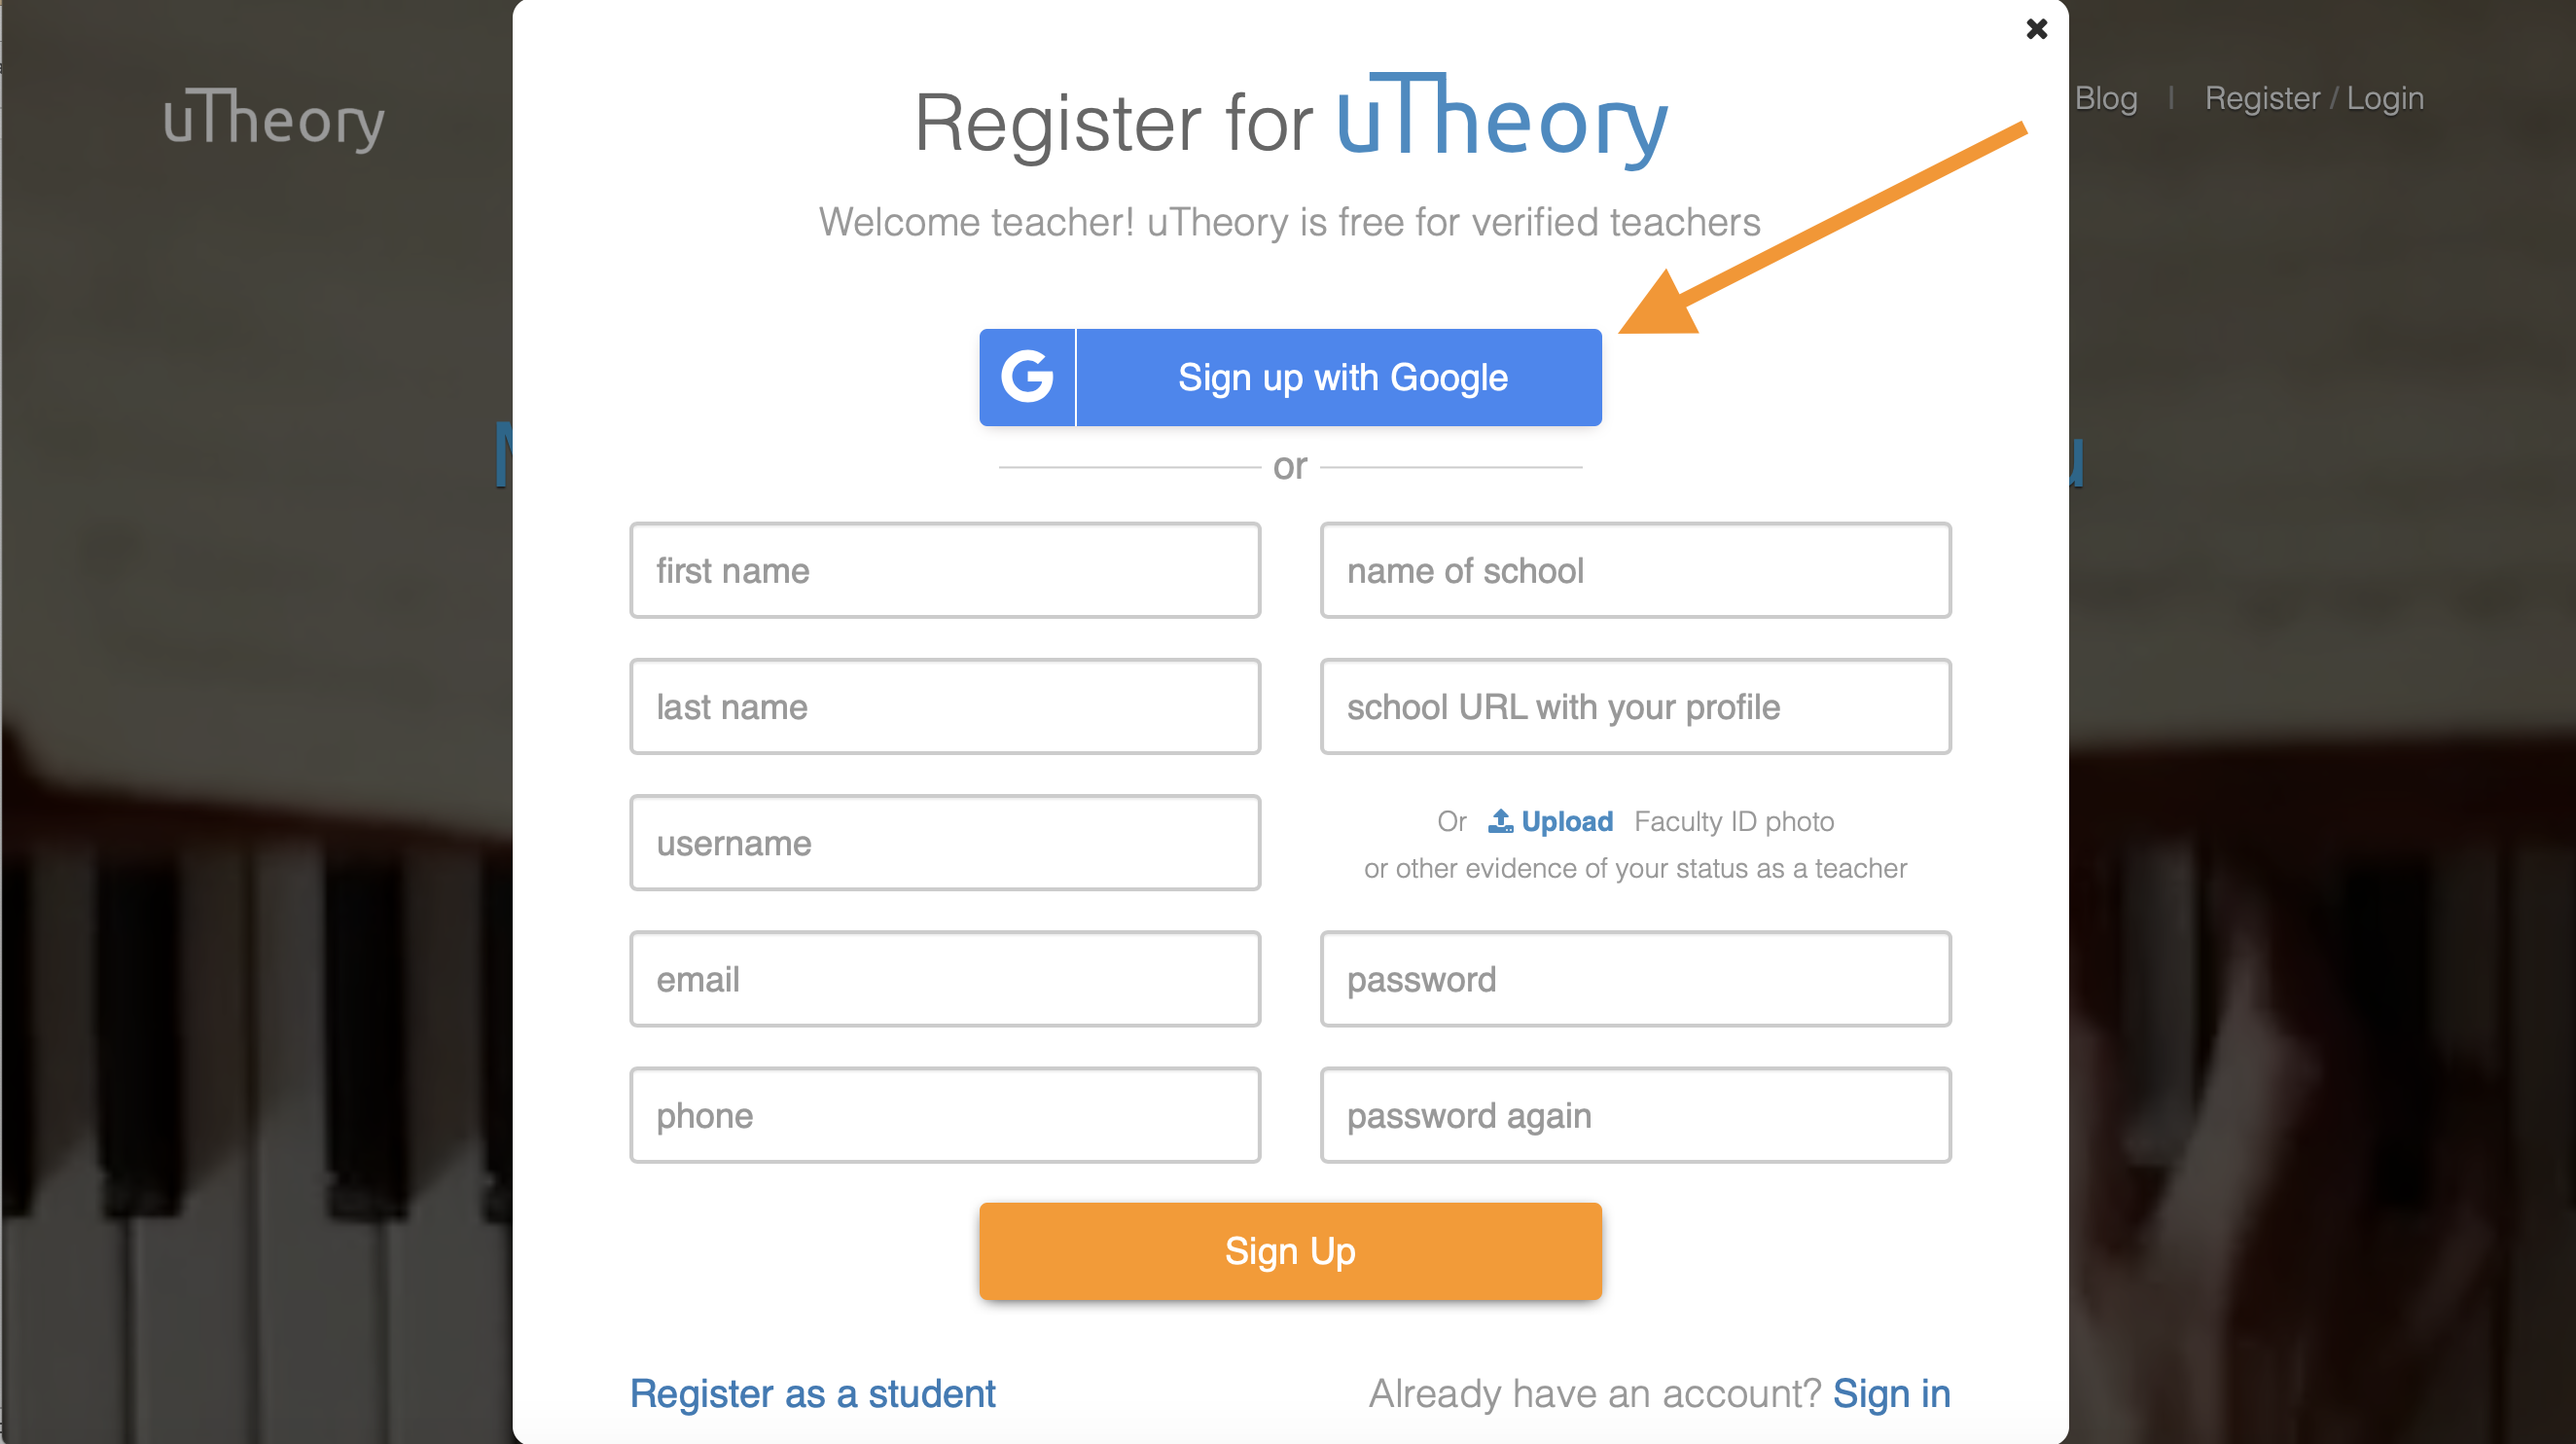 Image of registering with Google